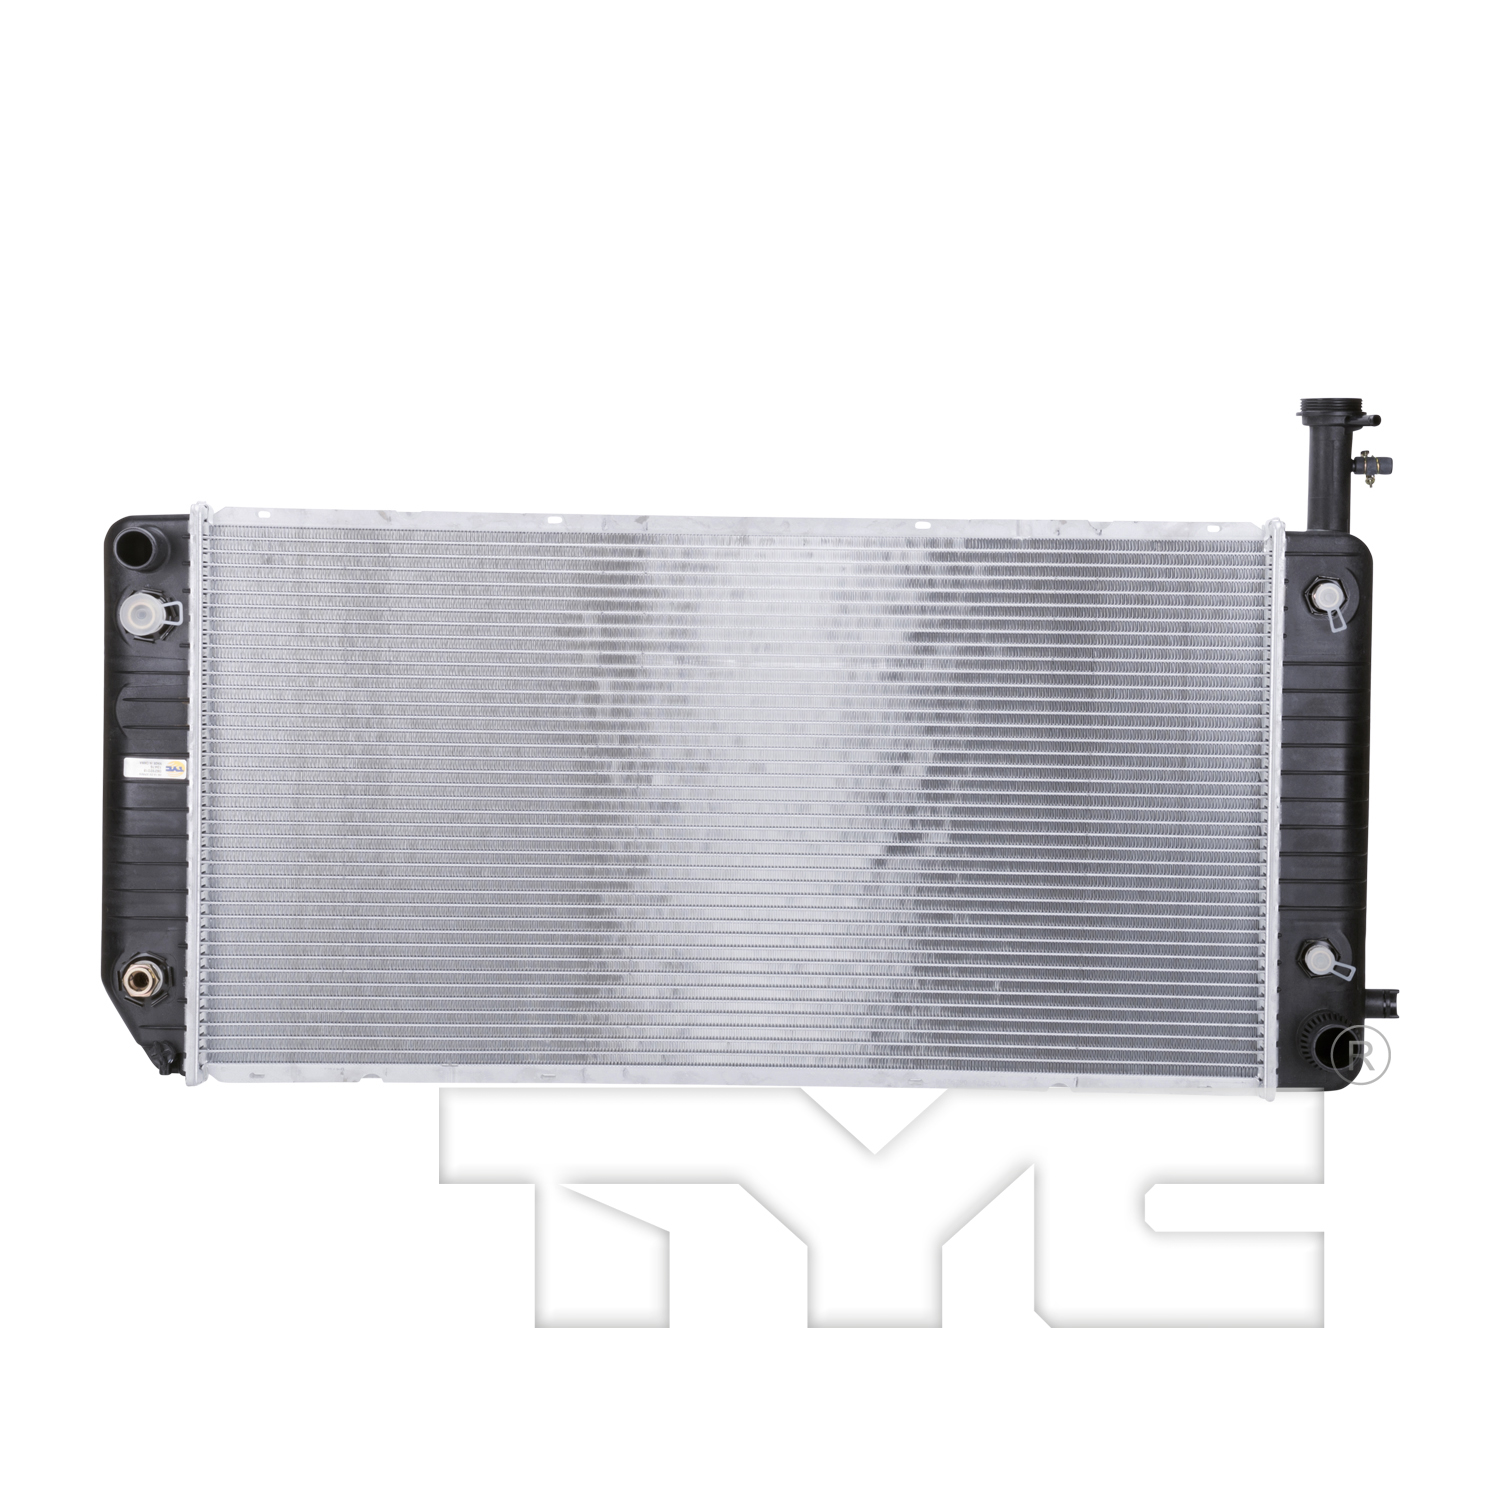 Aftermarket RADIATORS for CHEVROLET - EXPRESS 2500, EXPRESS 2500,09-14,Radiator assembly